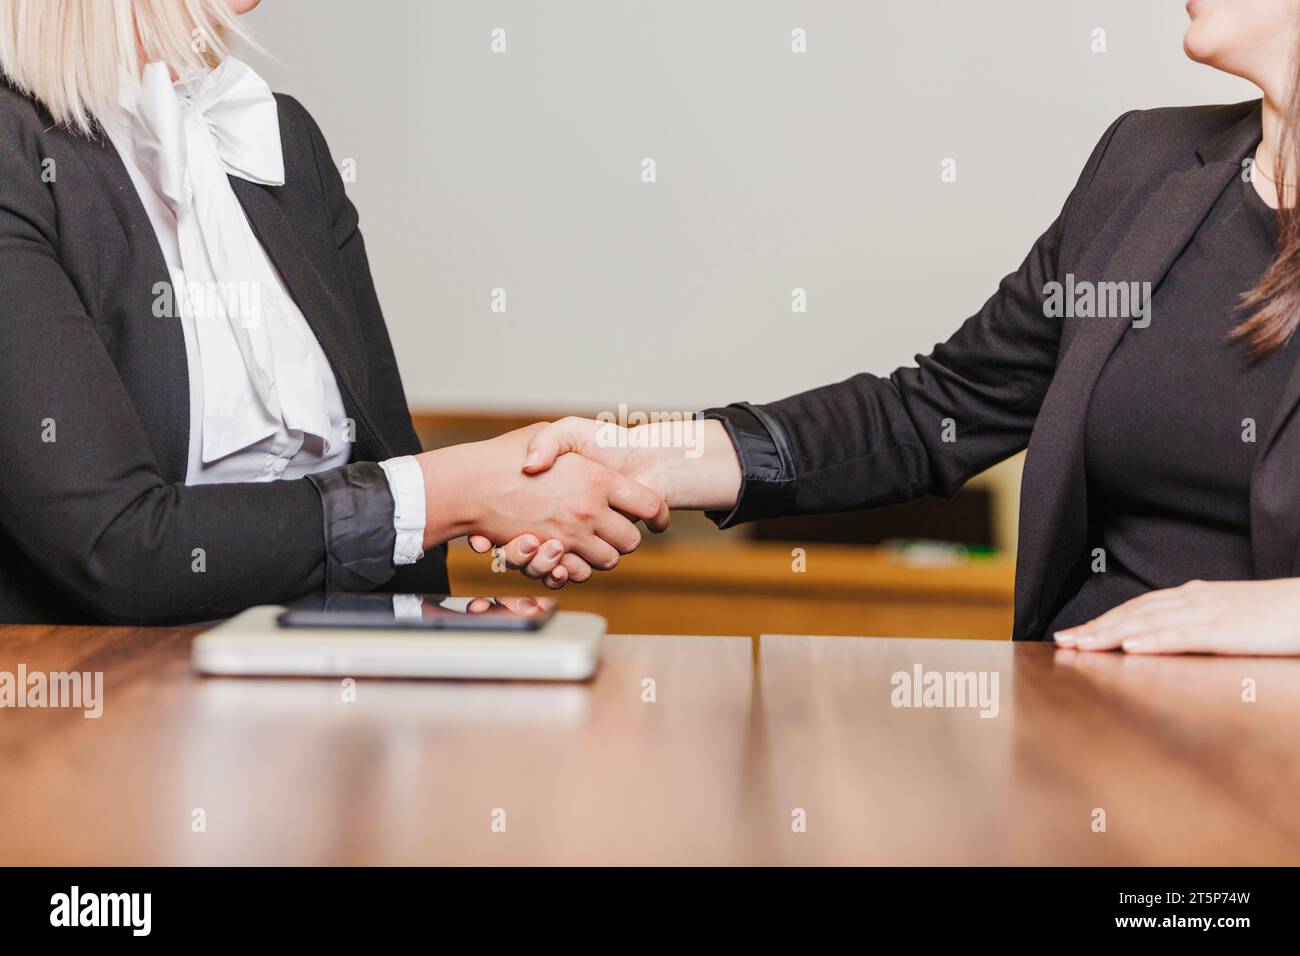 Women sitting table shaking hands Stock Photo